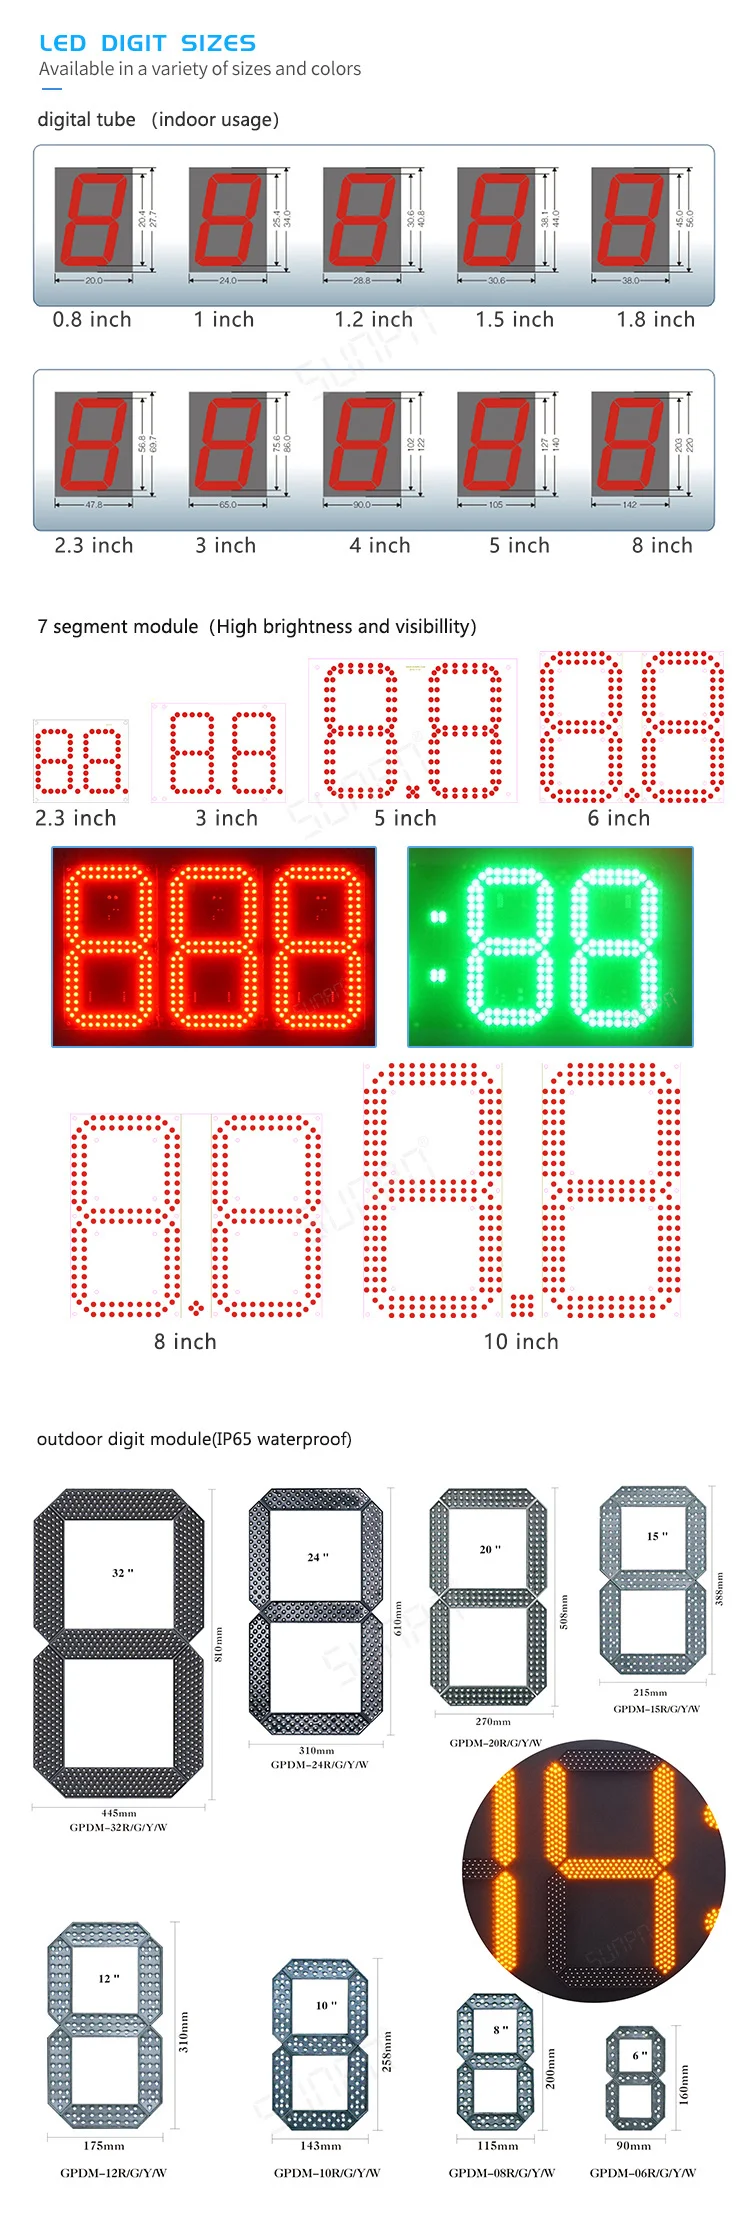 Customizable 3 Digit LED Day Counter/LED Countdown Counter